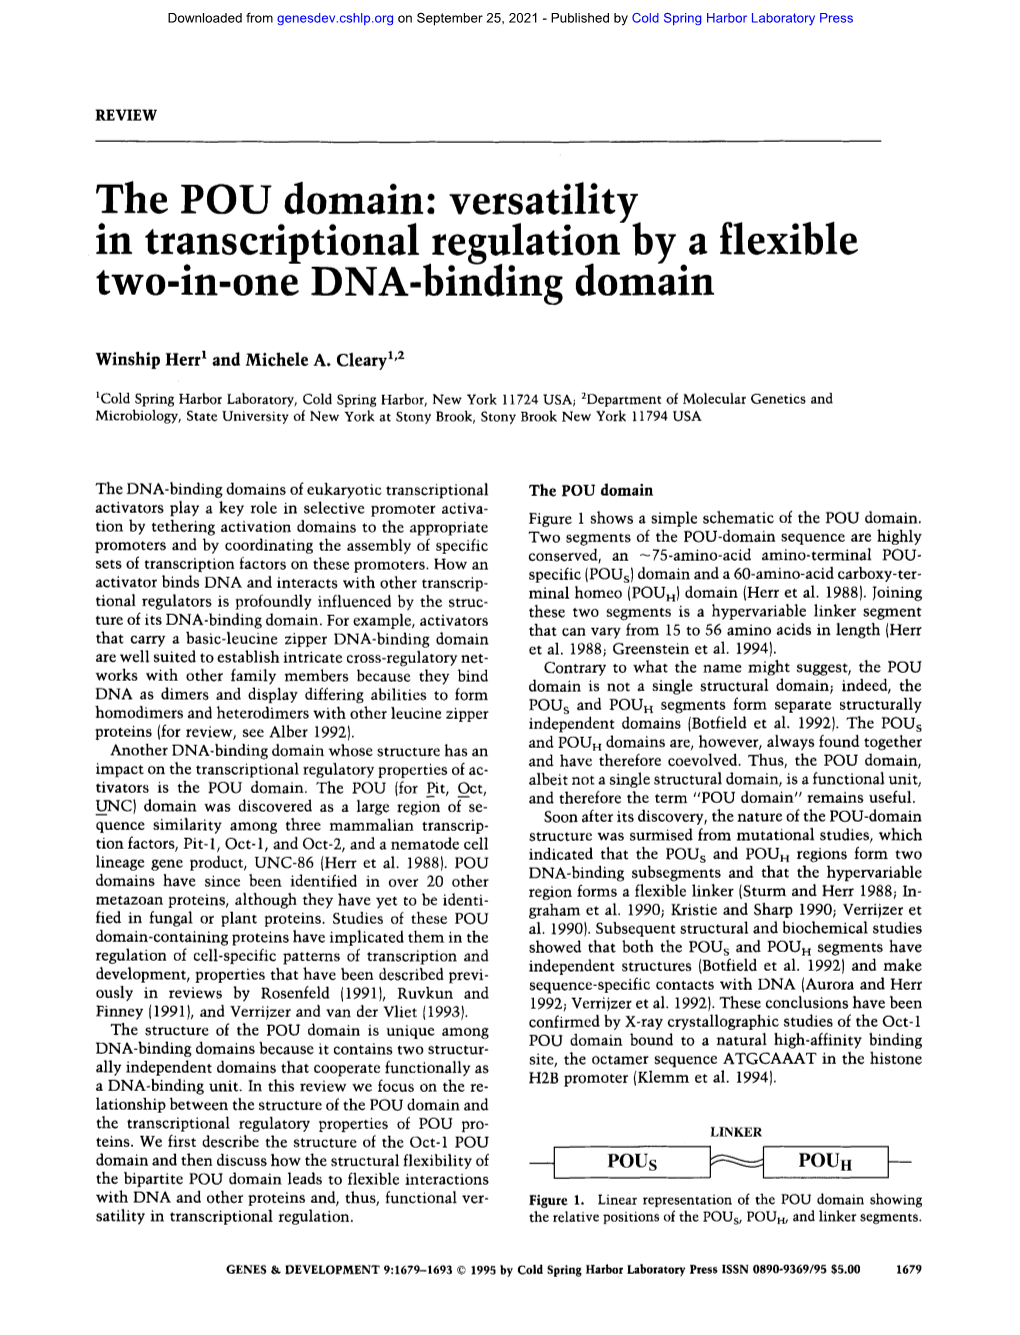 The POU Domain: Versatility in Transcriptional Regulation by a Flexible Two-In-One DNA-Binding Domain